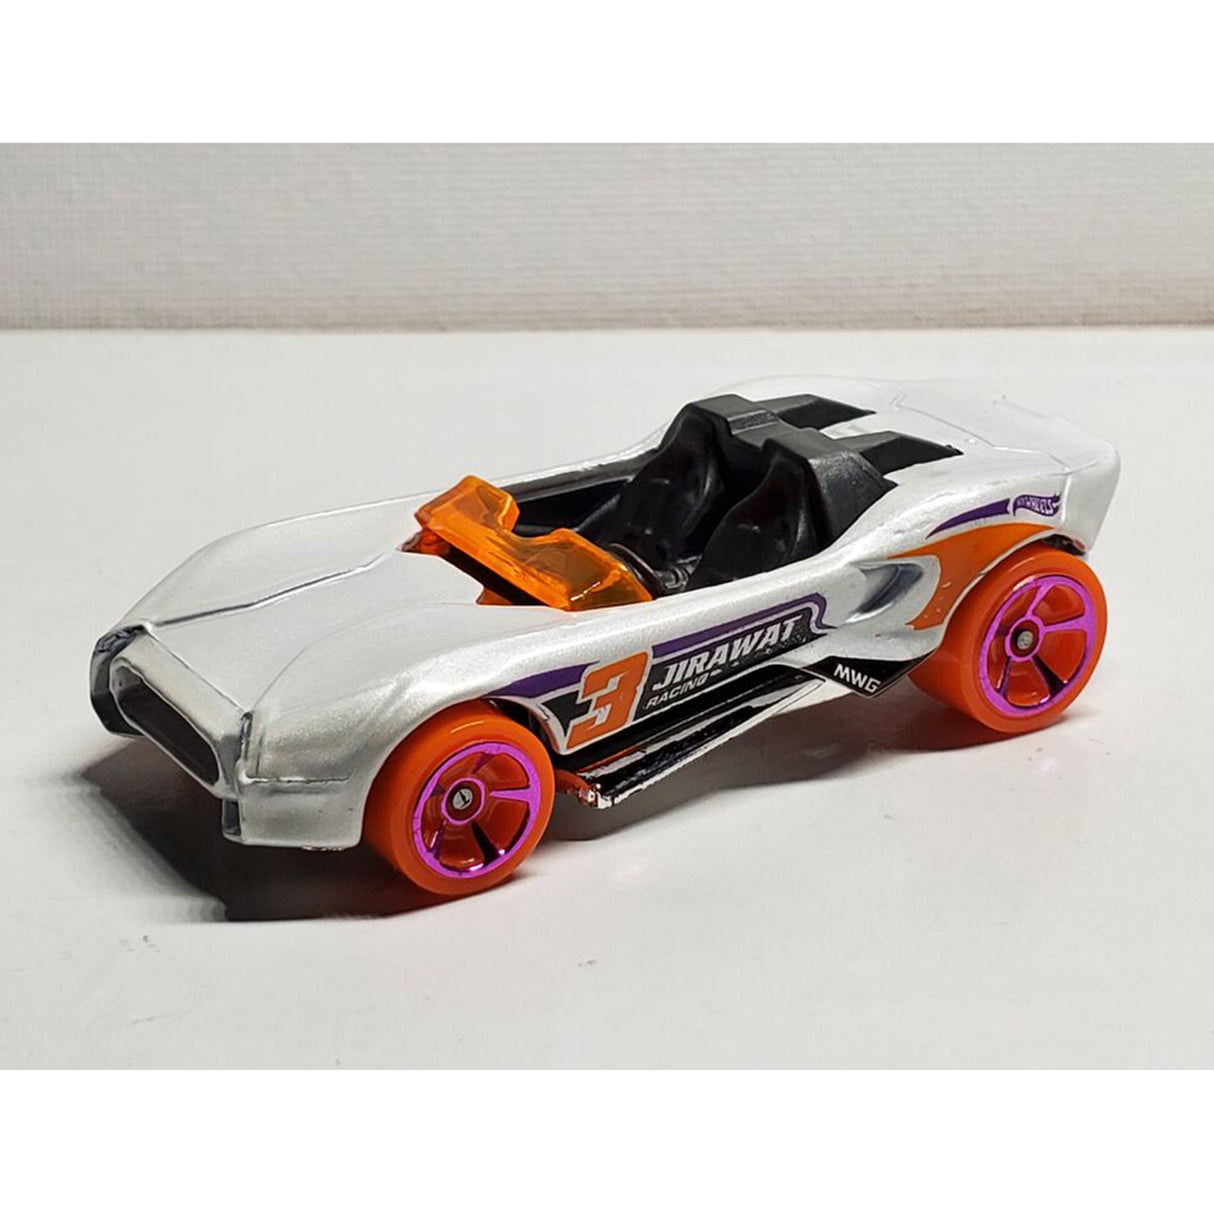 Hot Wheels 5-Car Gift Pack - Action